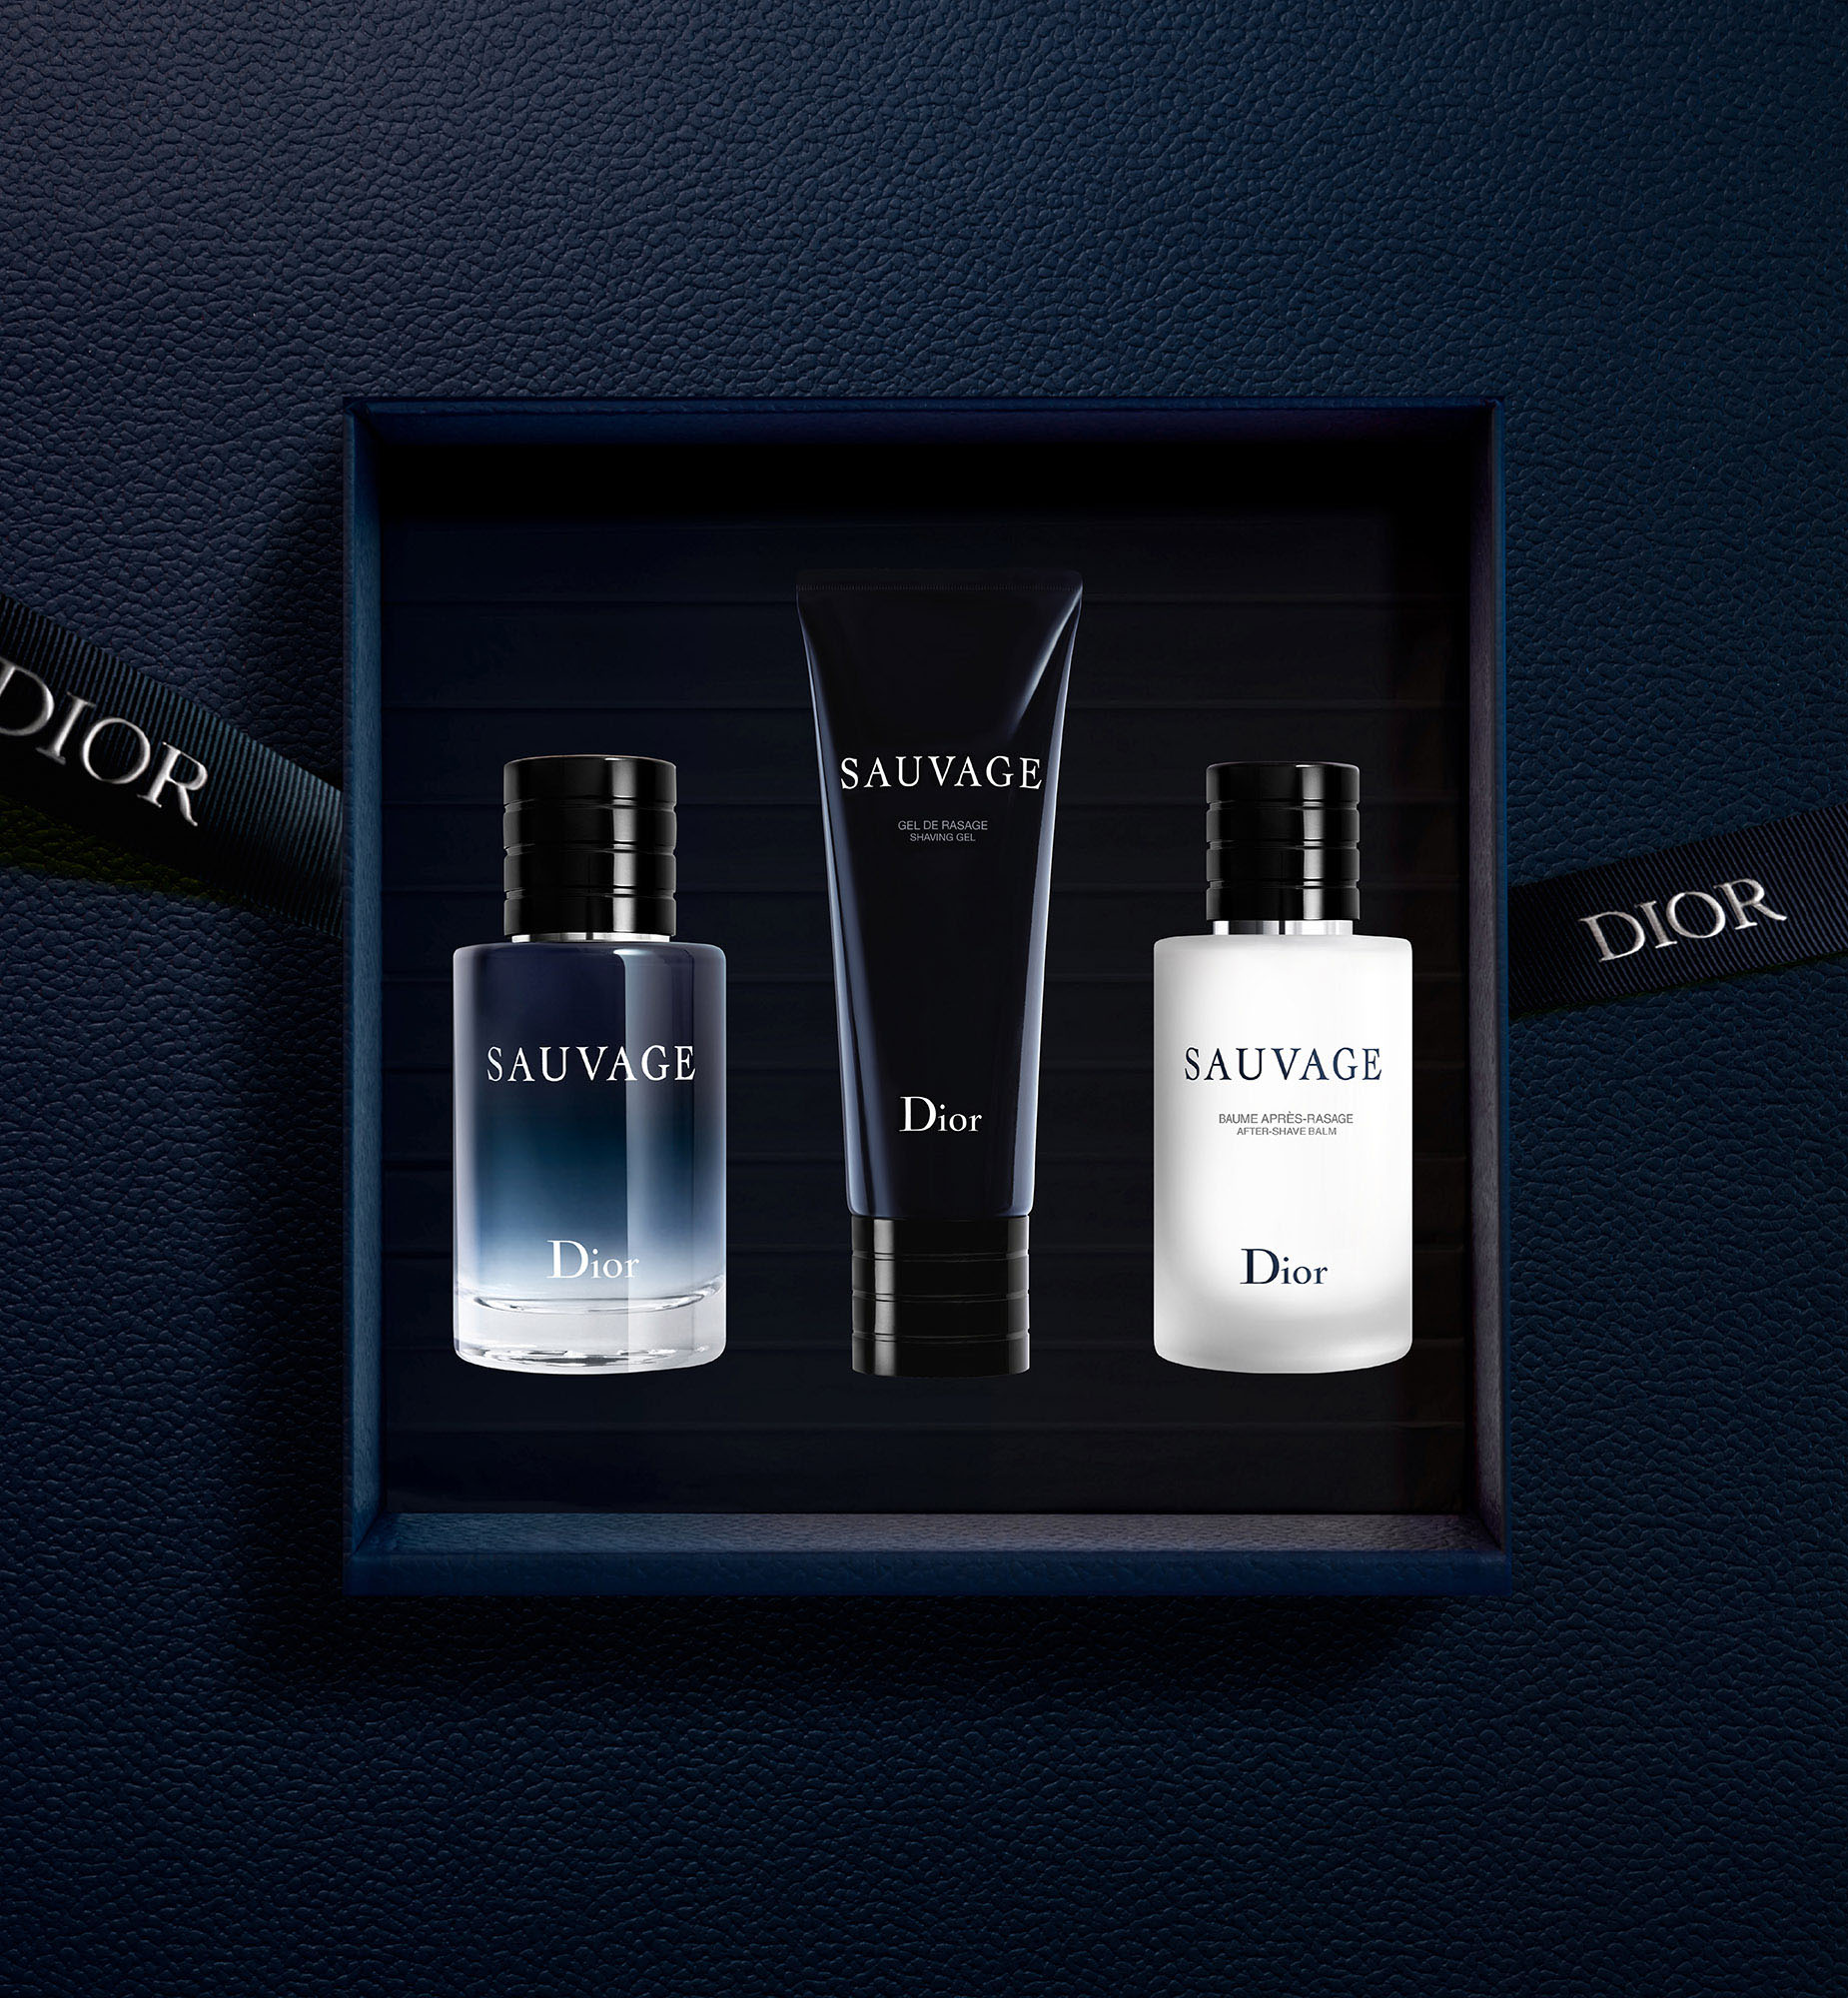 Men's DIOR Grooming & Cologne Gifts & Sets